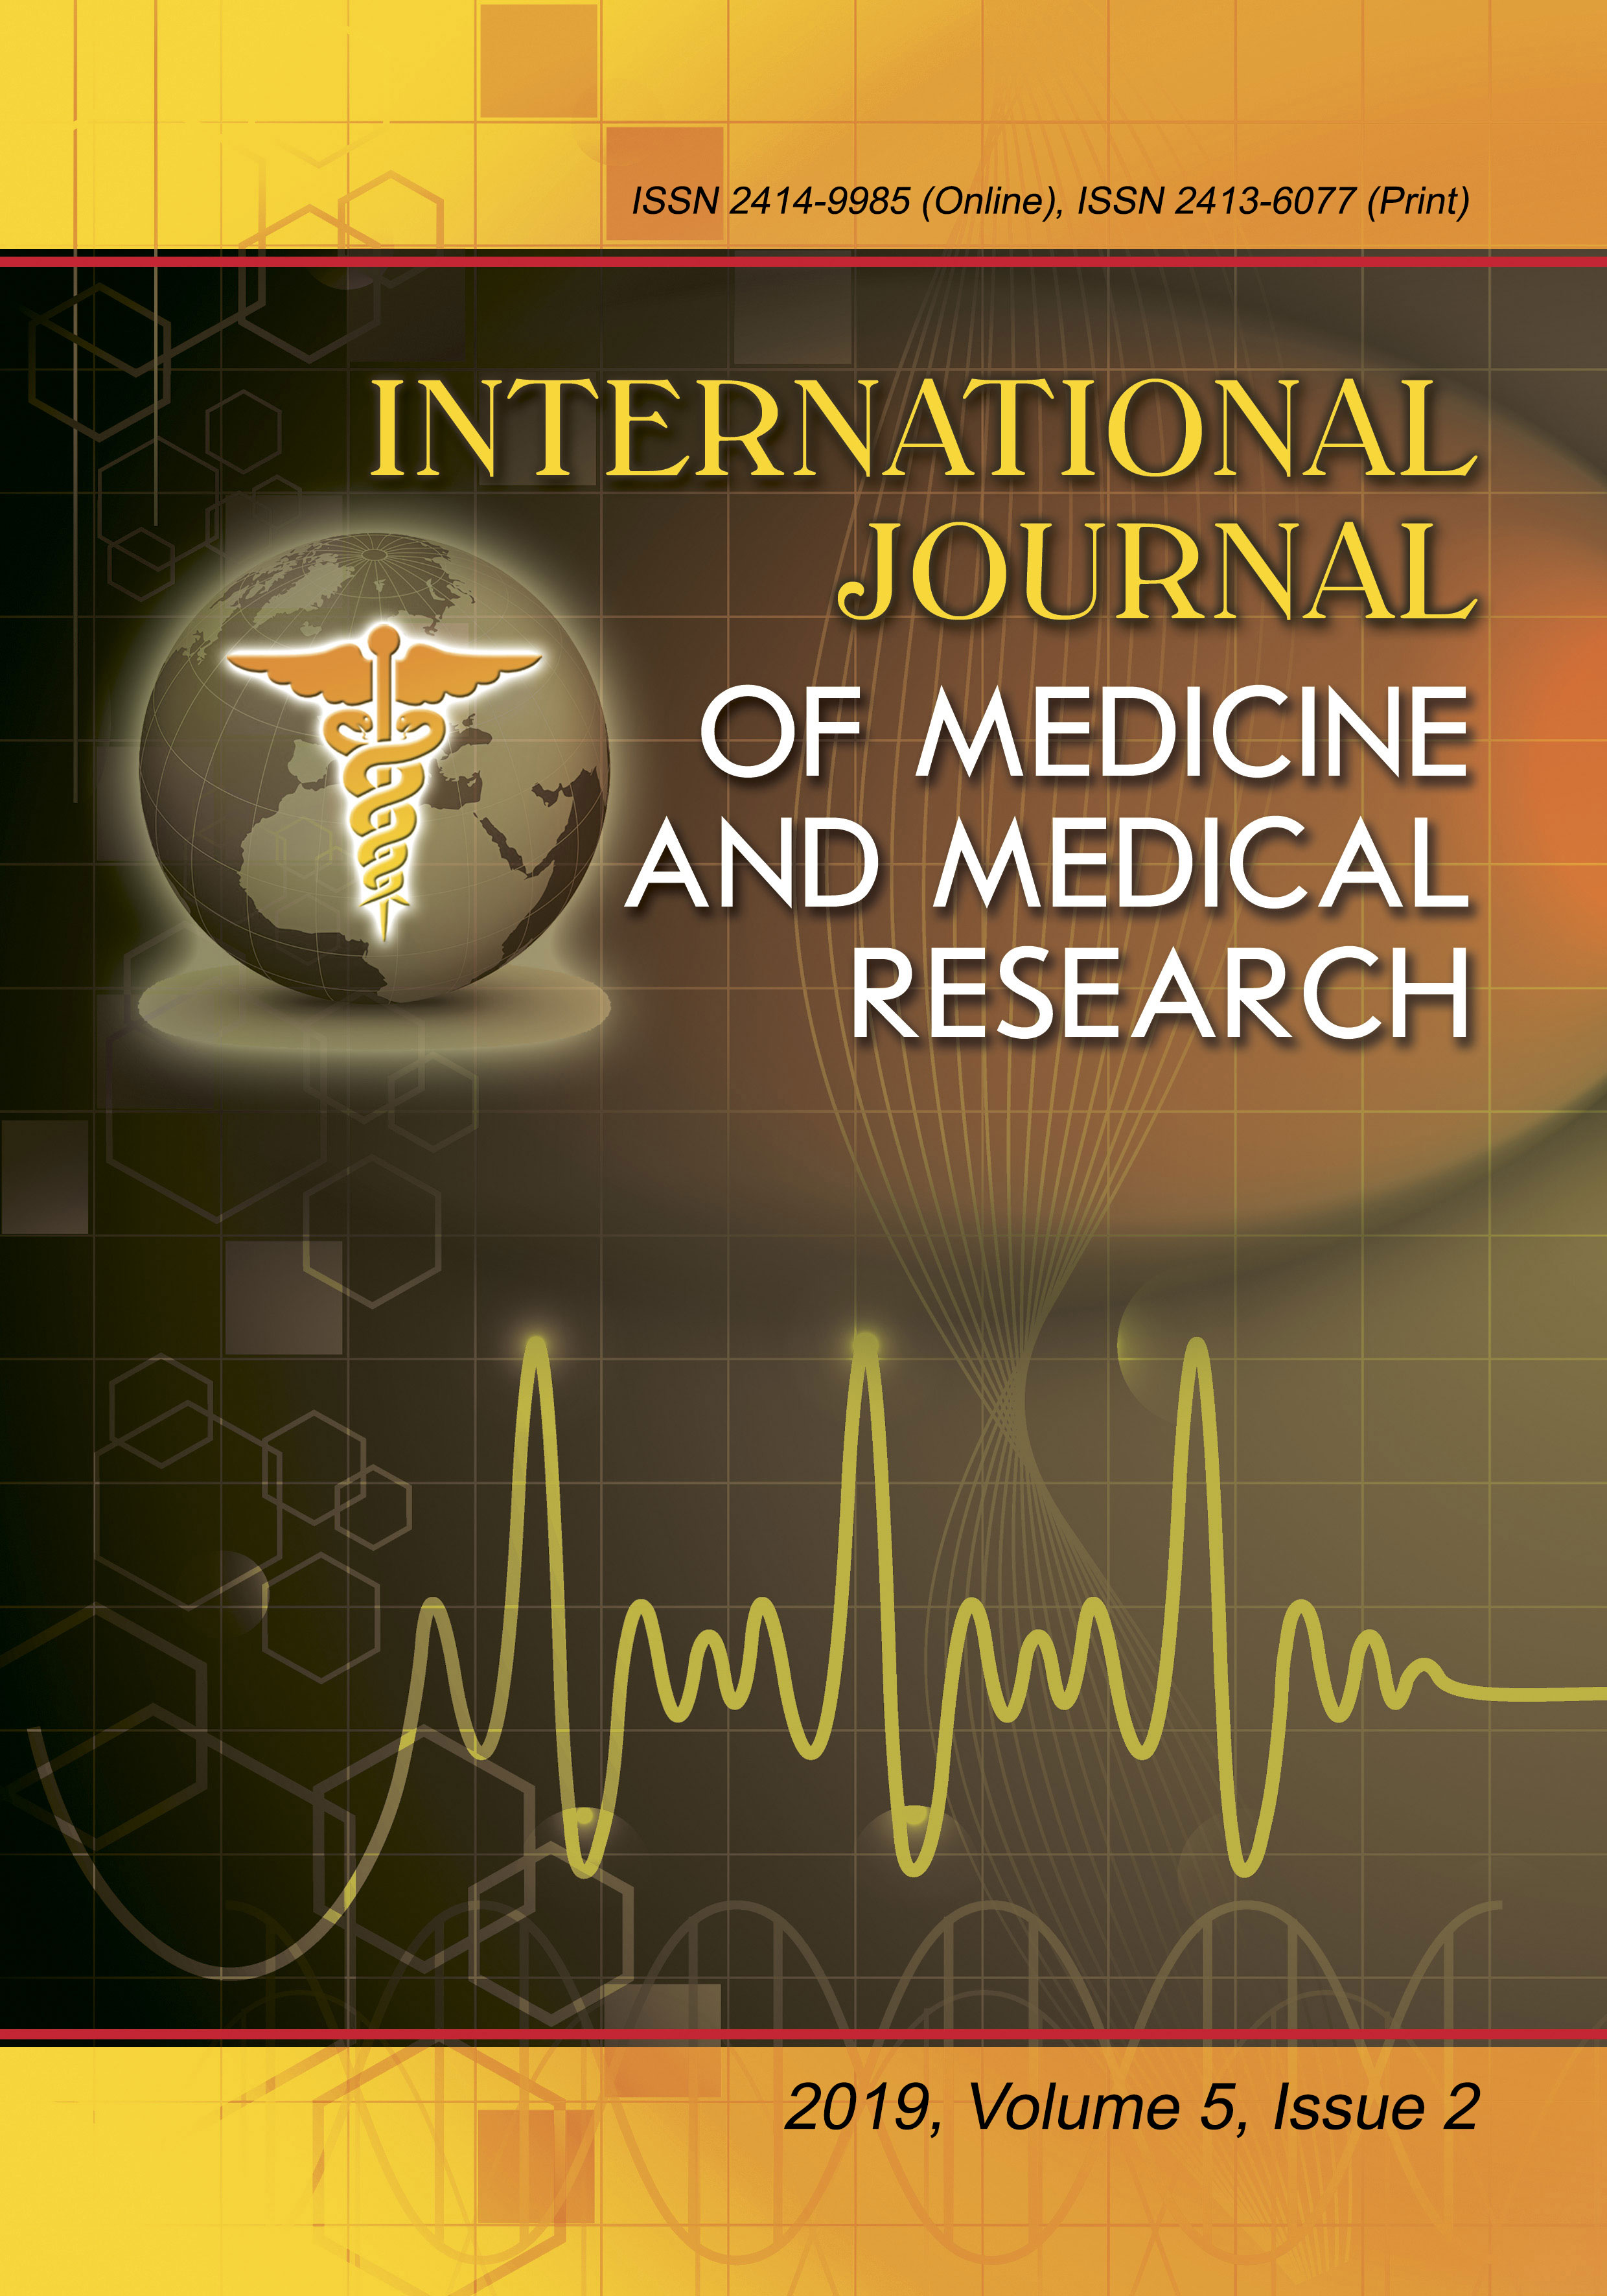 					View Vol. 5 No. 2 (2019): International Journal of Medicine and Medical Research
				